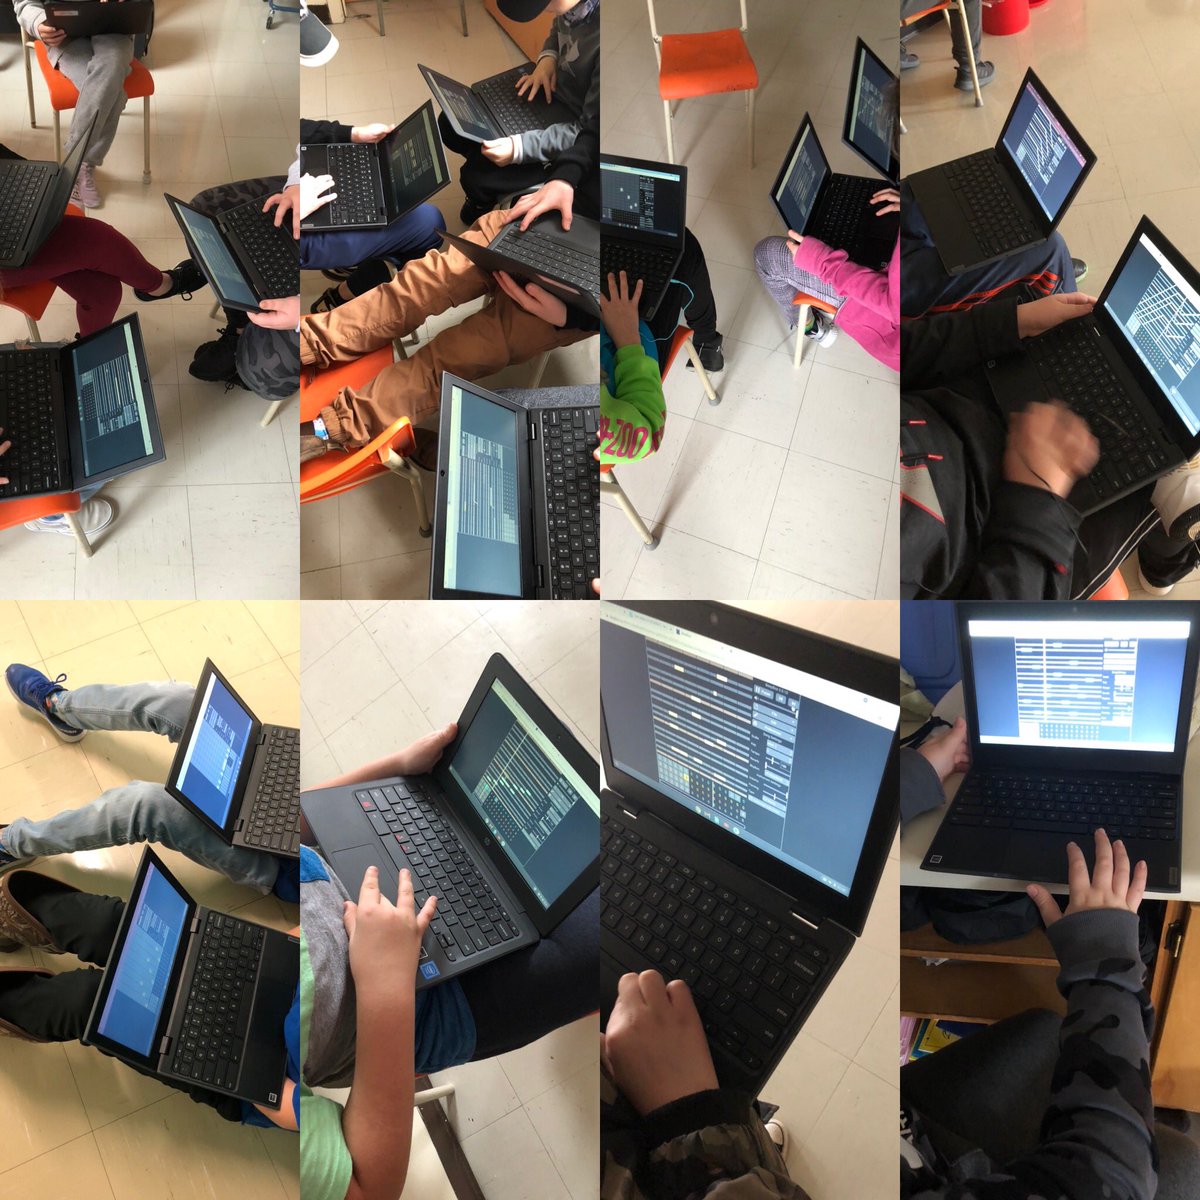 Working on composition skills in Gr 6 using @beepboxco @NLESDCA @nlmsic